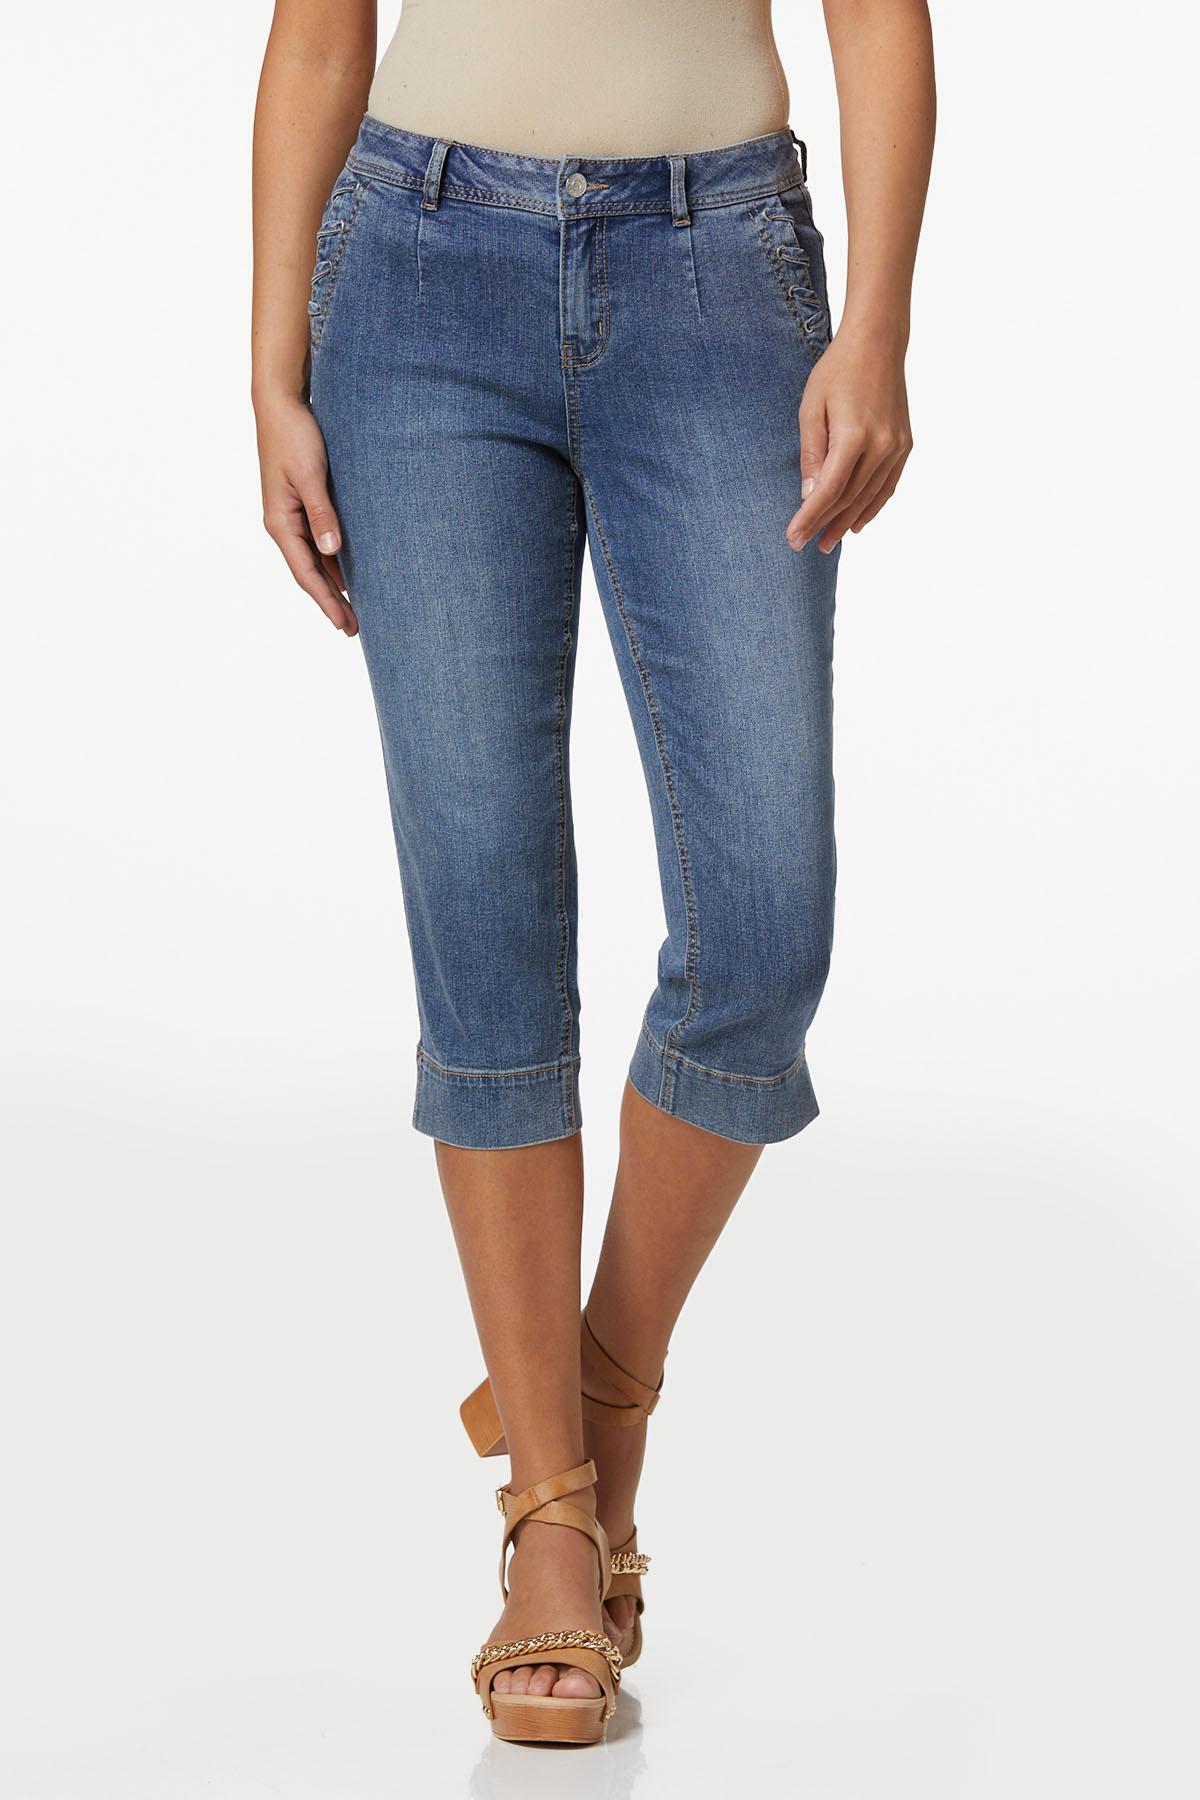 Cato Fashions  Cato Cropped Lace Up Pocket Jeans